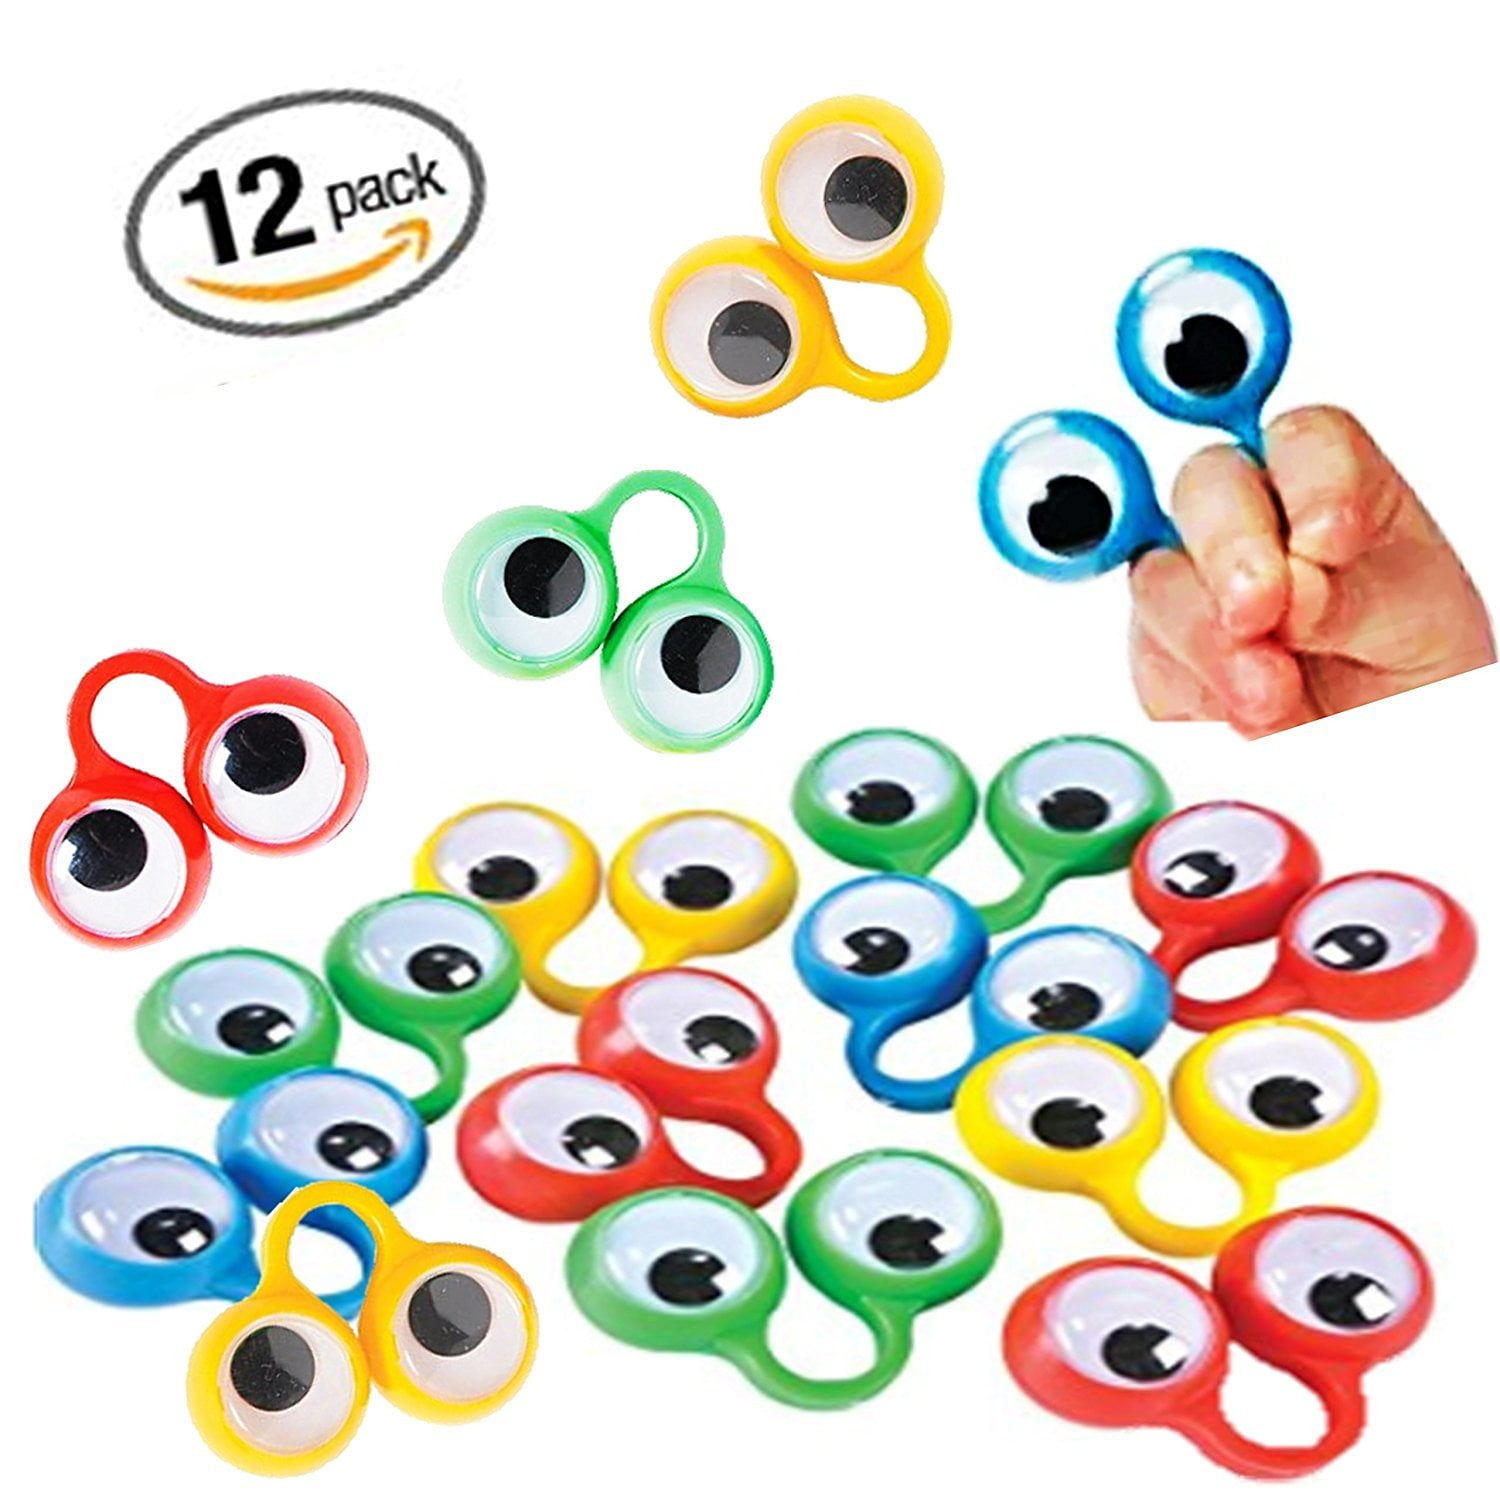 Eye Finger Puppets Googly Eye Finger Puppets Wiggly Eyeball Finger Puppet Rings Eye Finger Toy Kids Party Favor 8 Colors A Pack of 80 